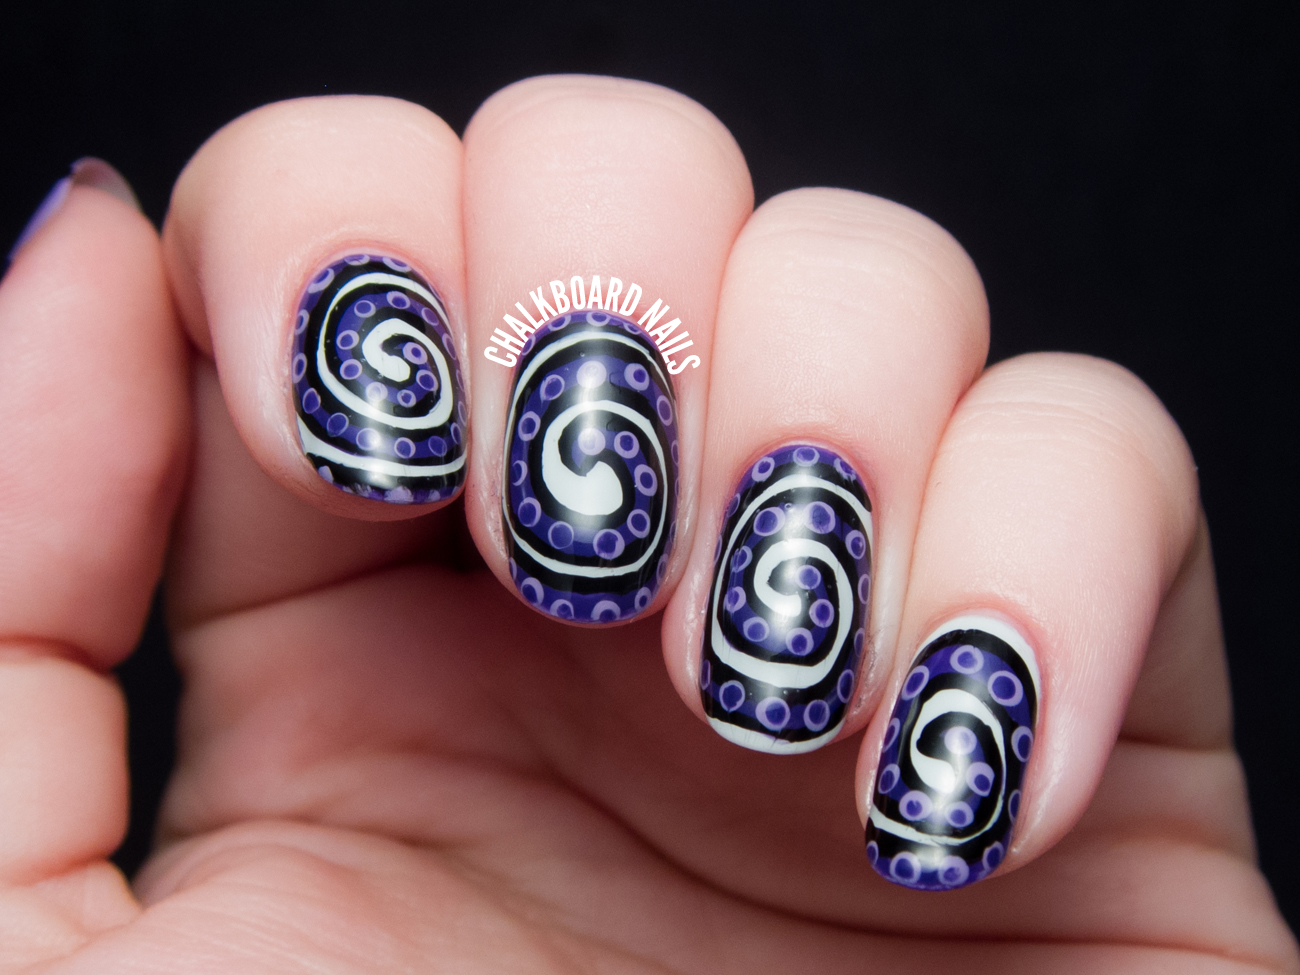 4. "Ursula Nail Art Tutorial Inspired by Disney's The Little Mermaid" - wide 1